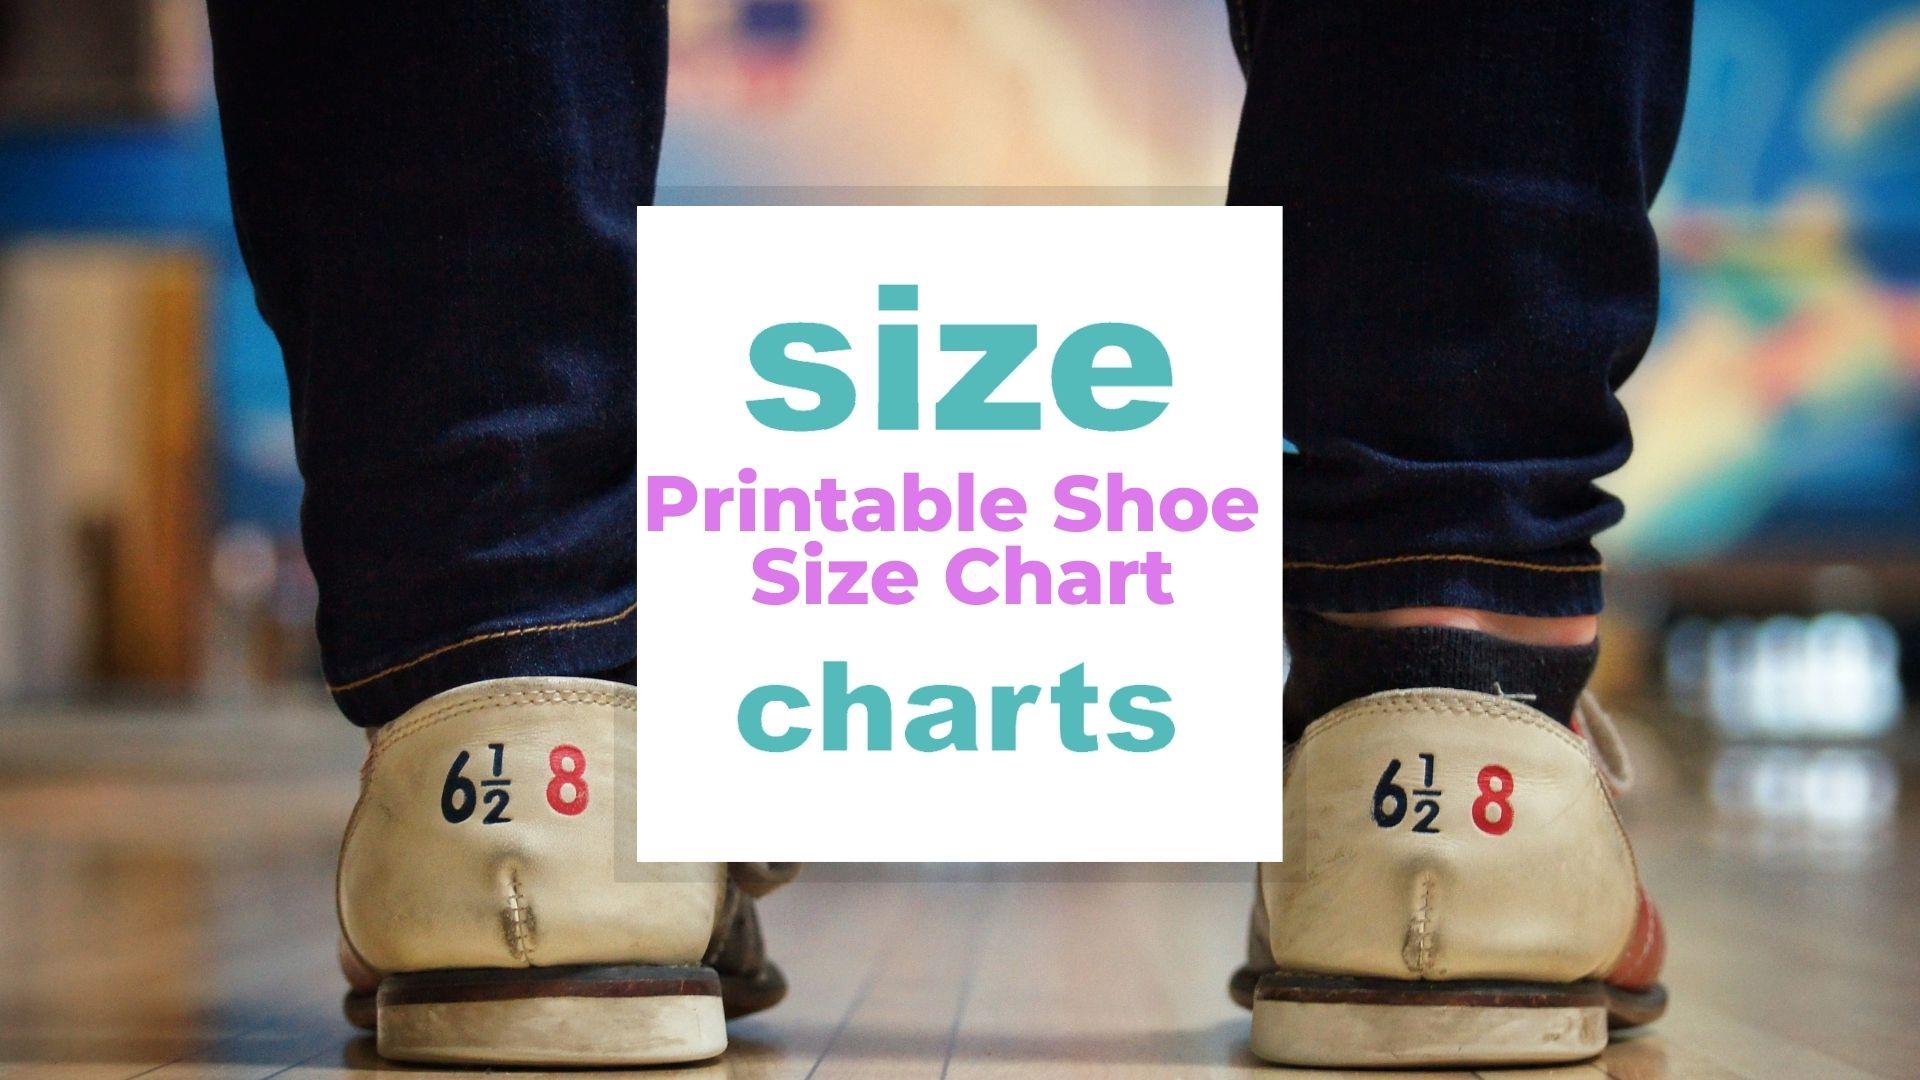 Printable Shoe Size Chart - How Do I Measure my Foot Size?